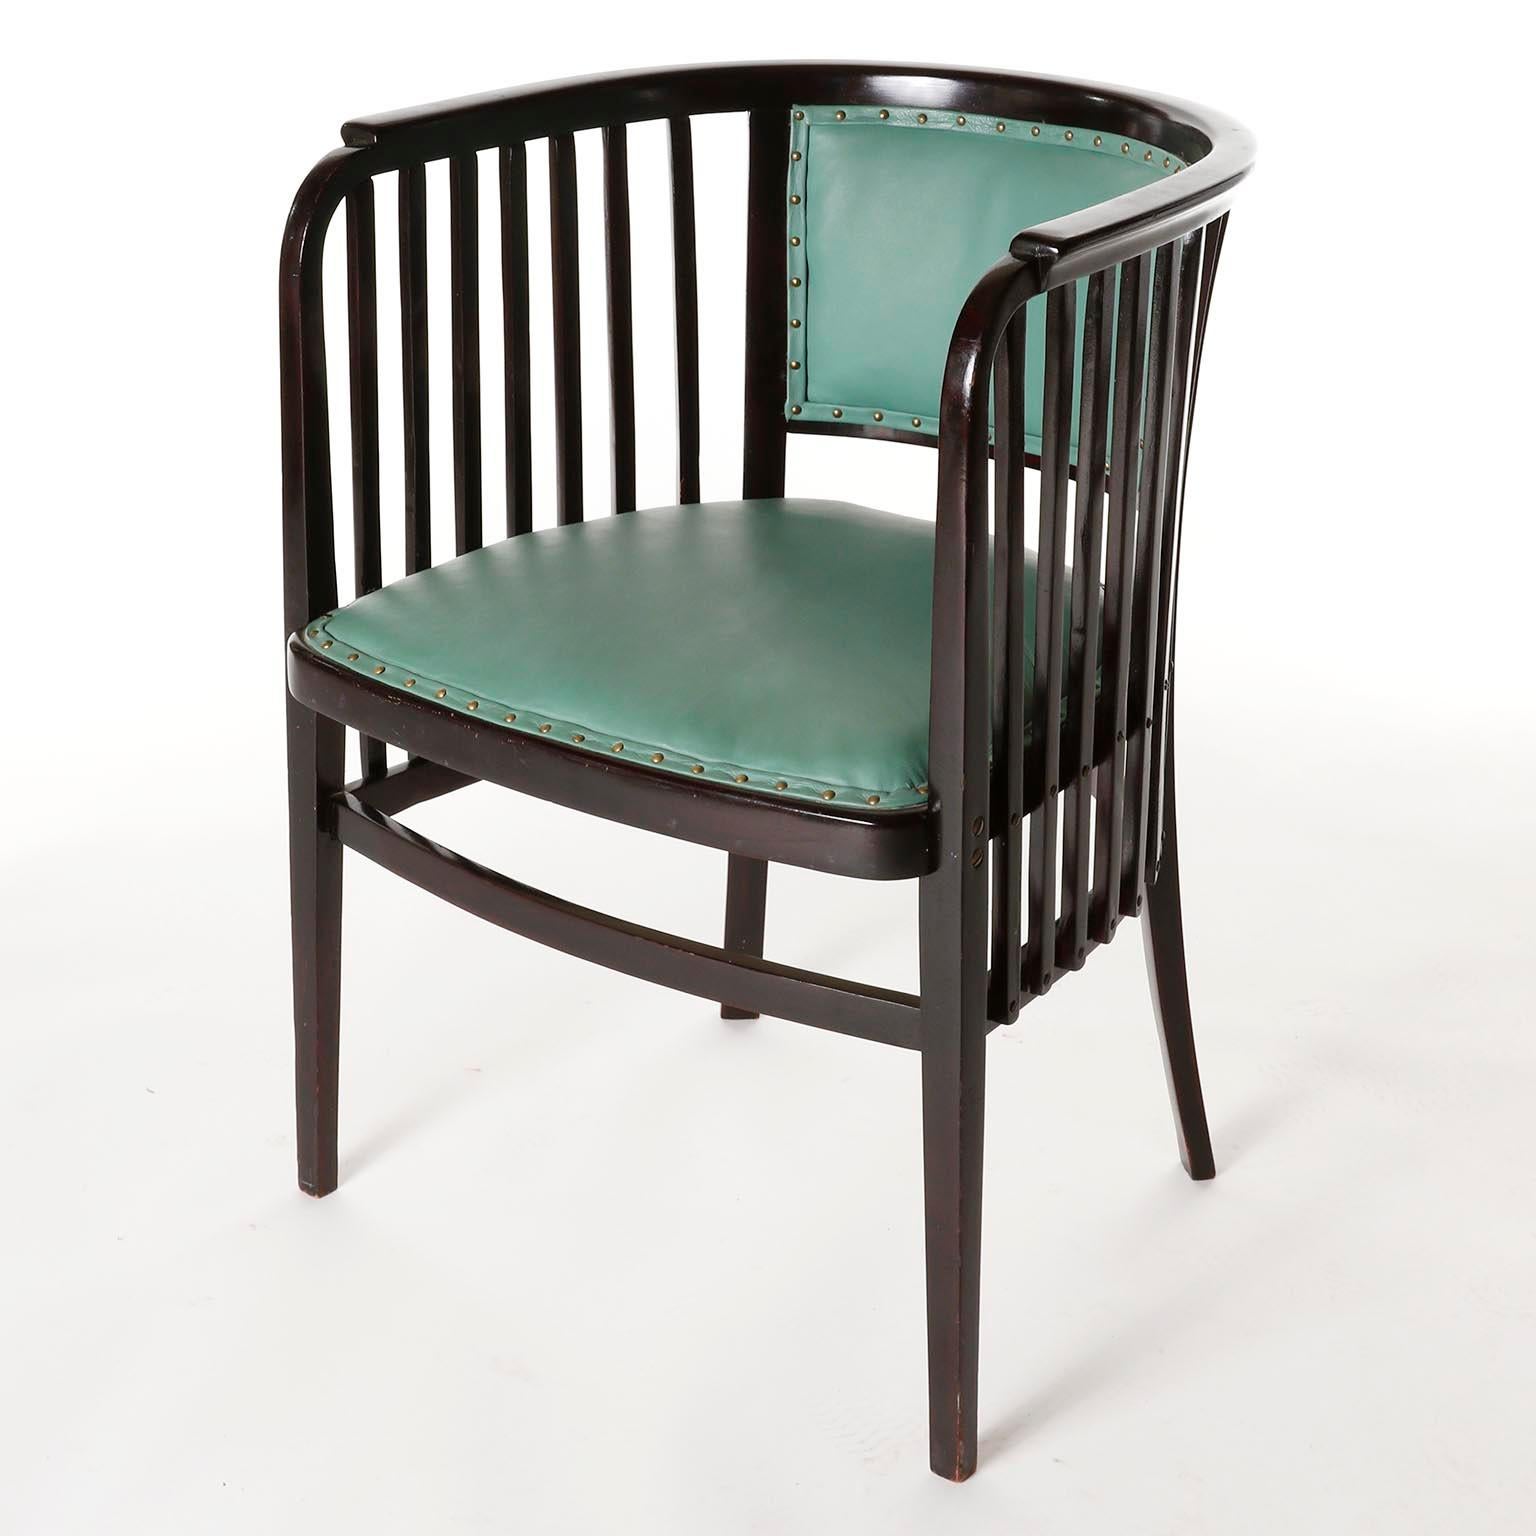 Stained Marcel Kammerer Seating Set Salon Suite, Thonet, Turquoise Green Leather, 1910